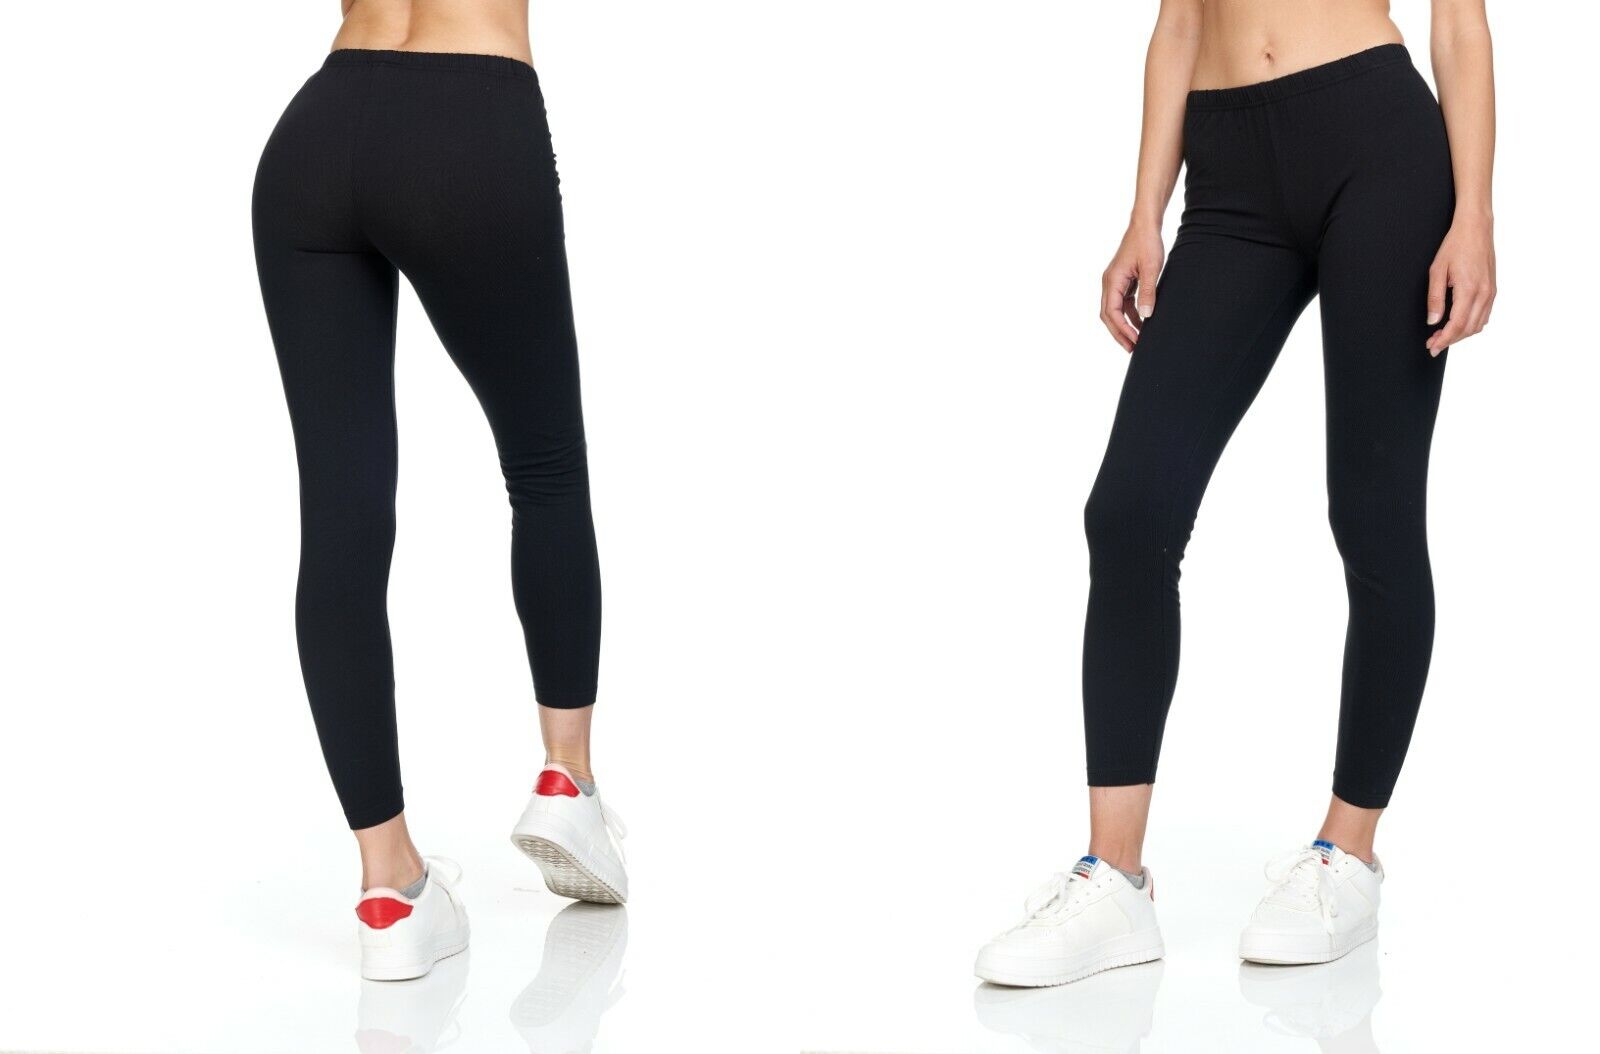 Womens Soft Stretch Cotton High Waisted Leggings Long Workout Yoga Pant Fitness